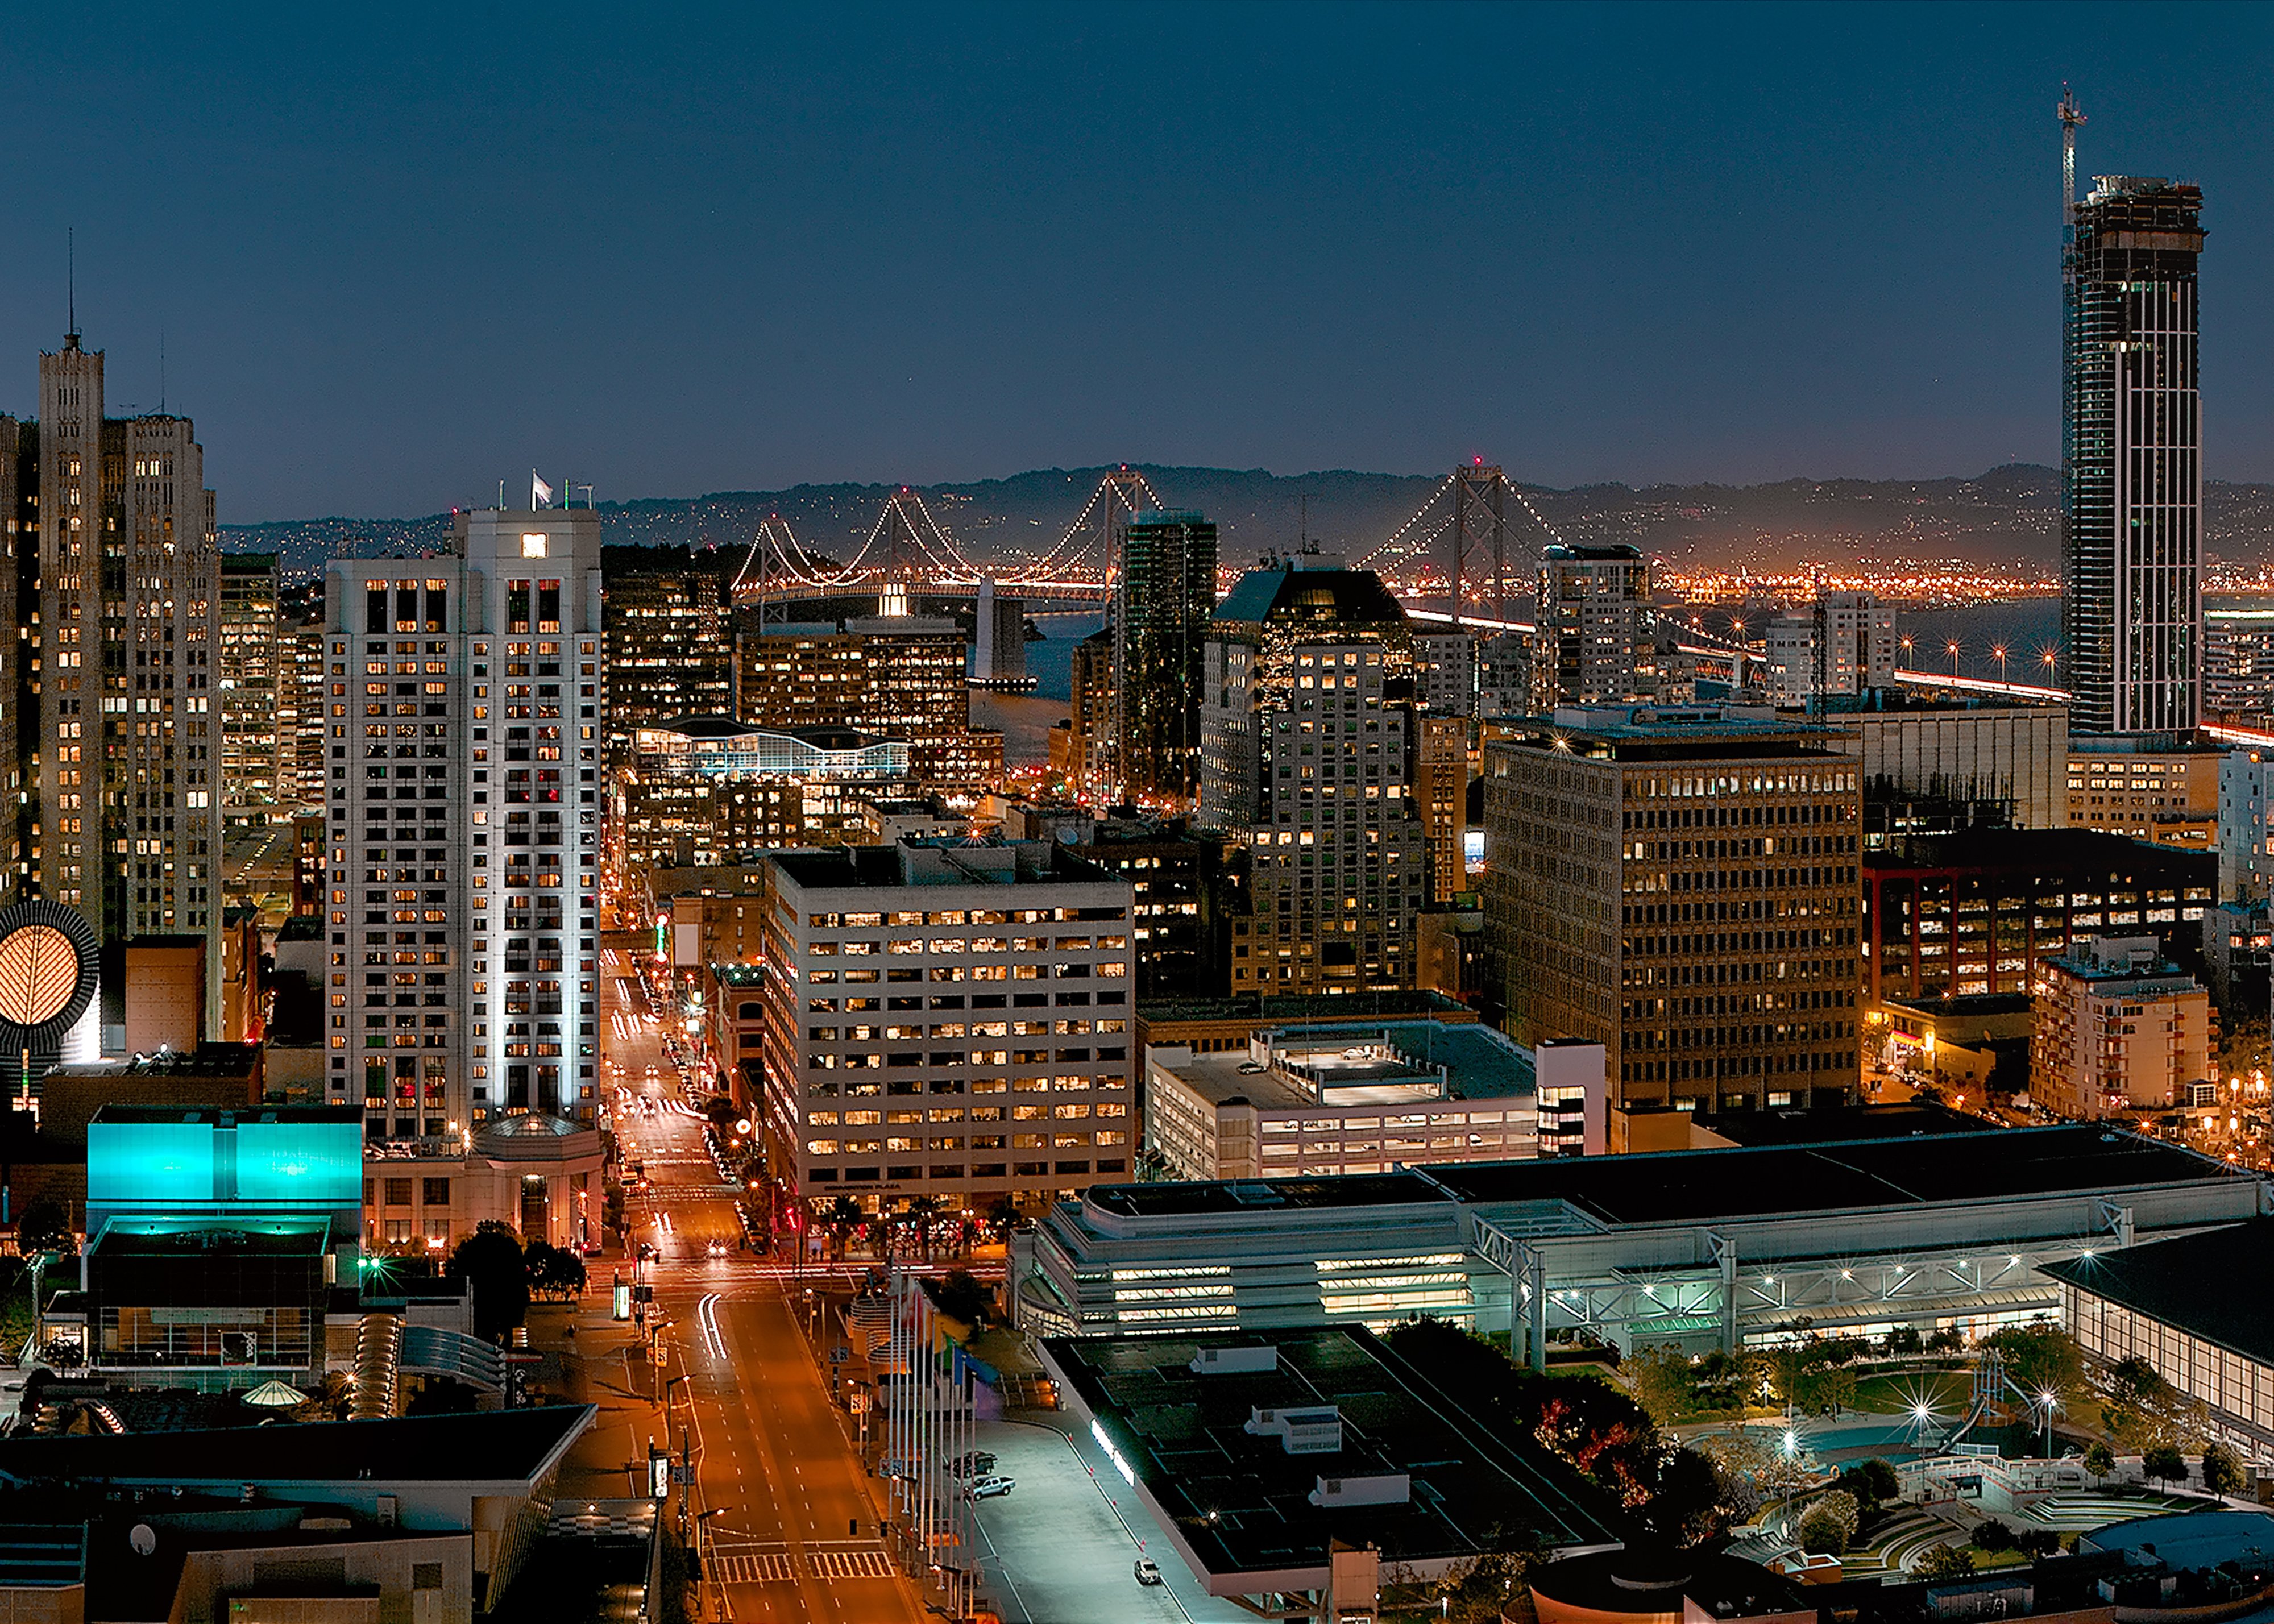 Experience the iconic San Francisco skyline from our hotel